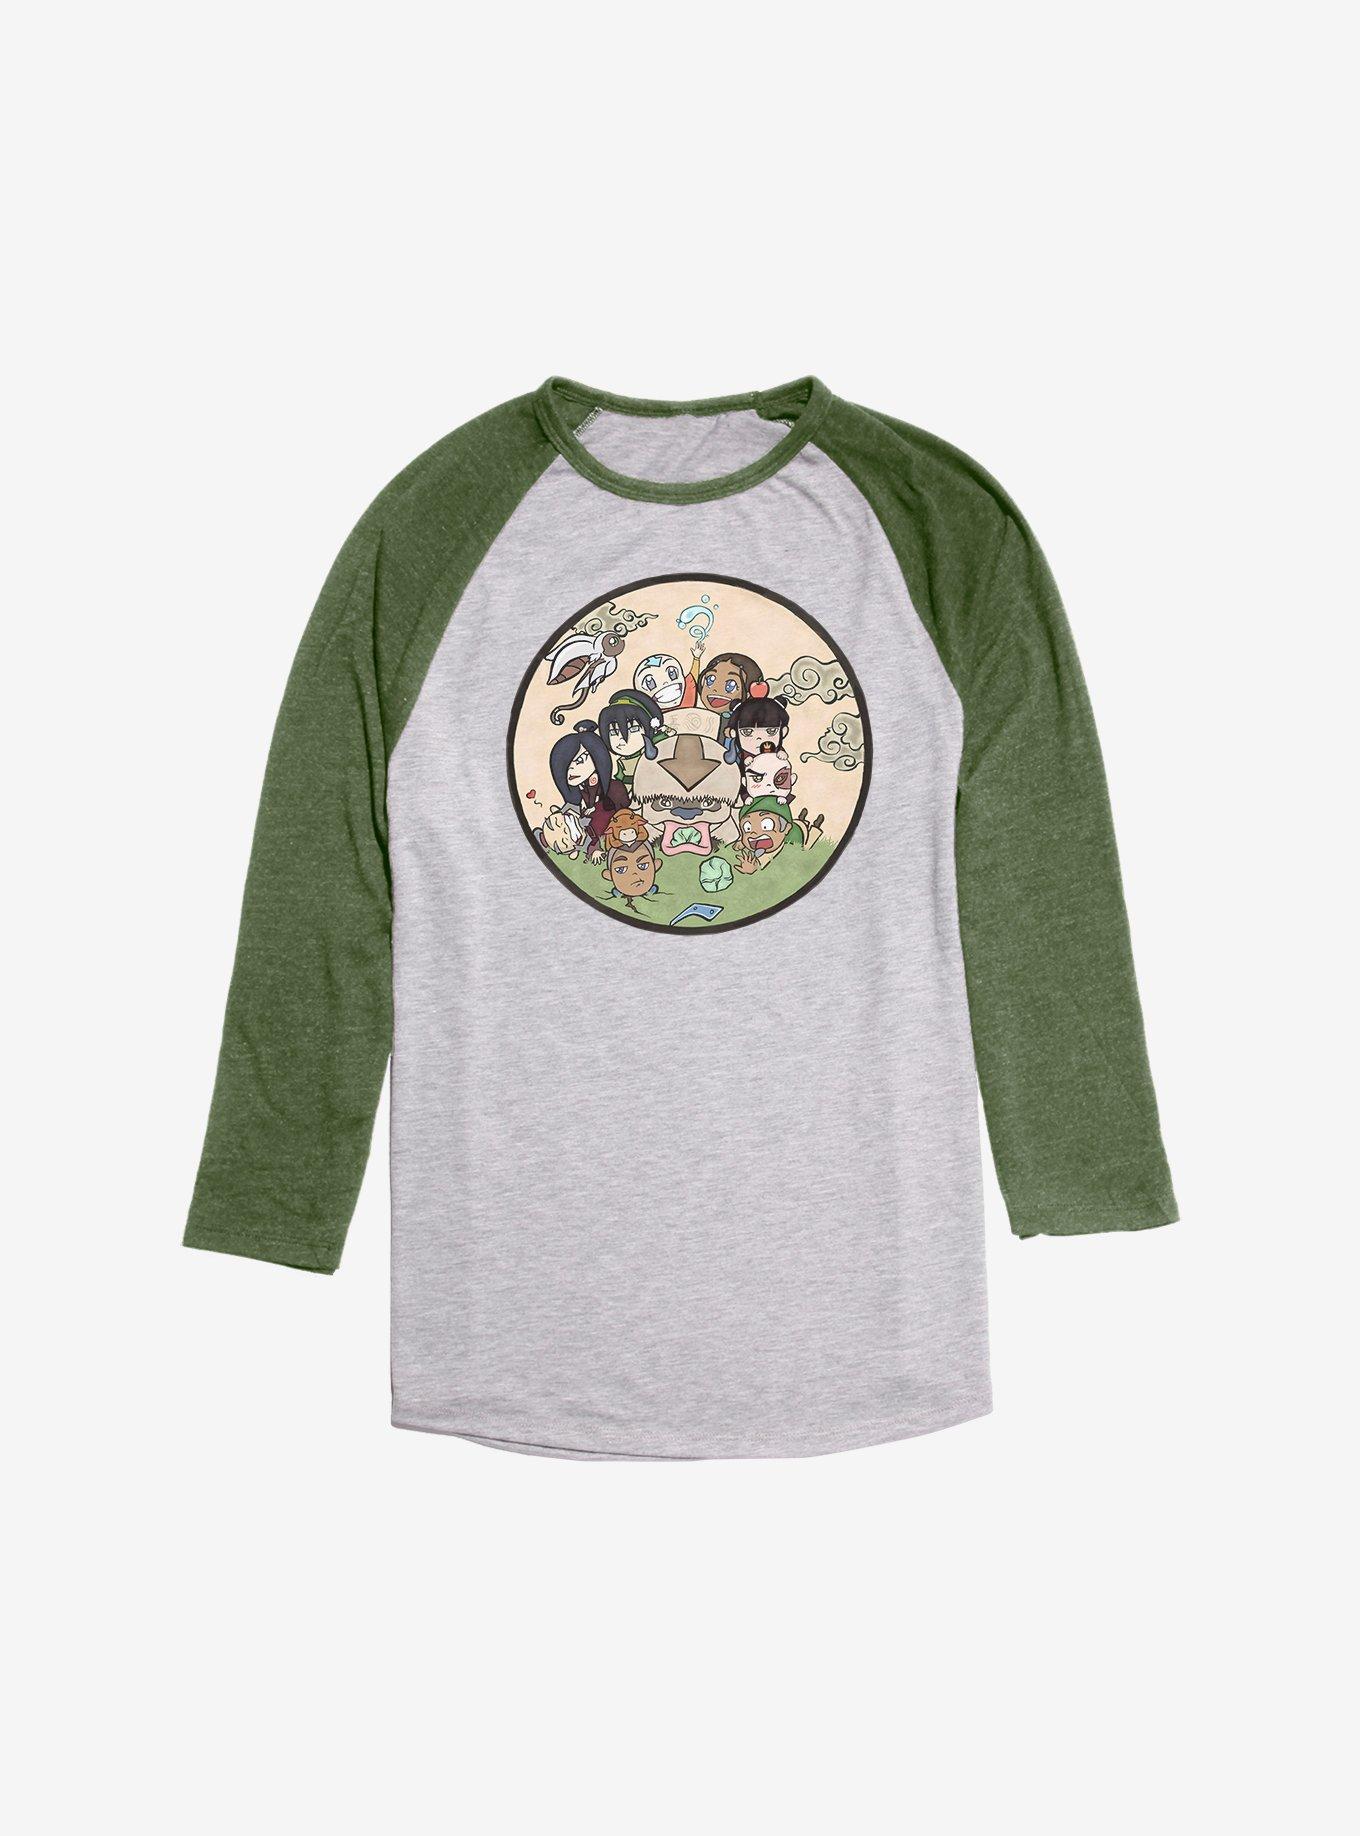 Avatar: The Last Airbender Aang's Memories Raglan, Ath Heather With Moss, hi-res